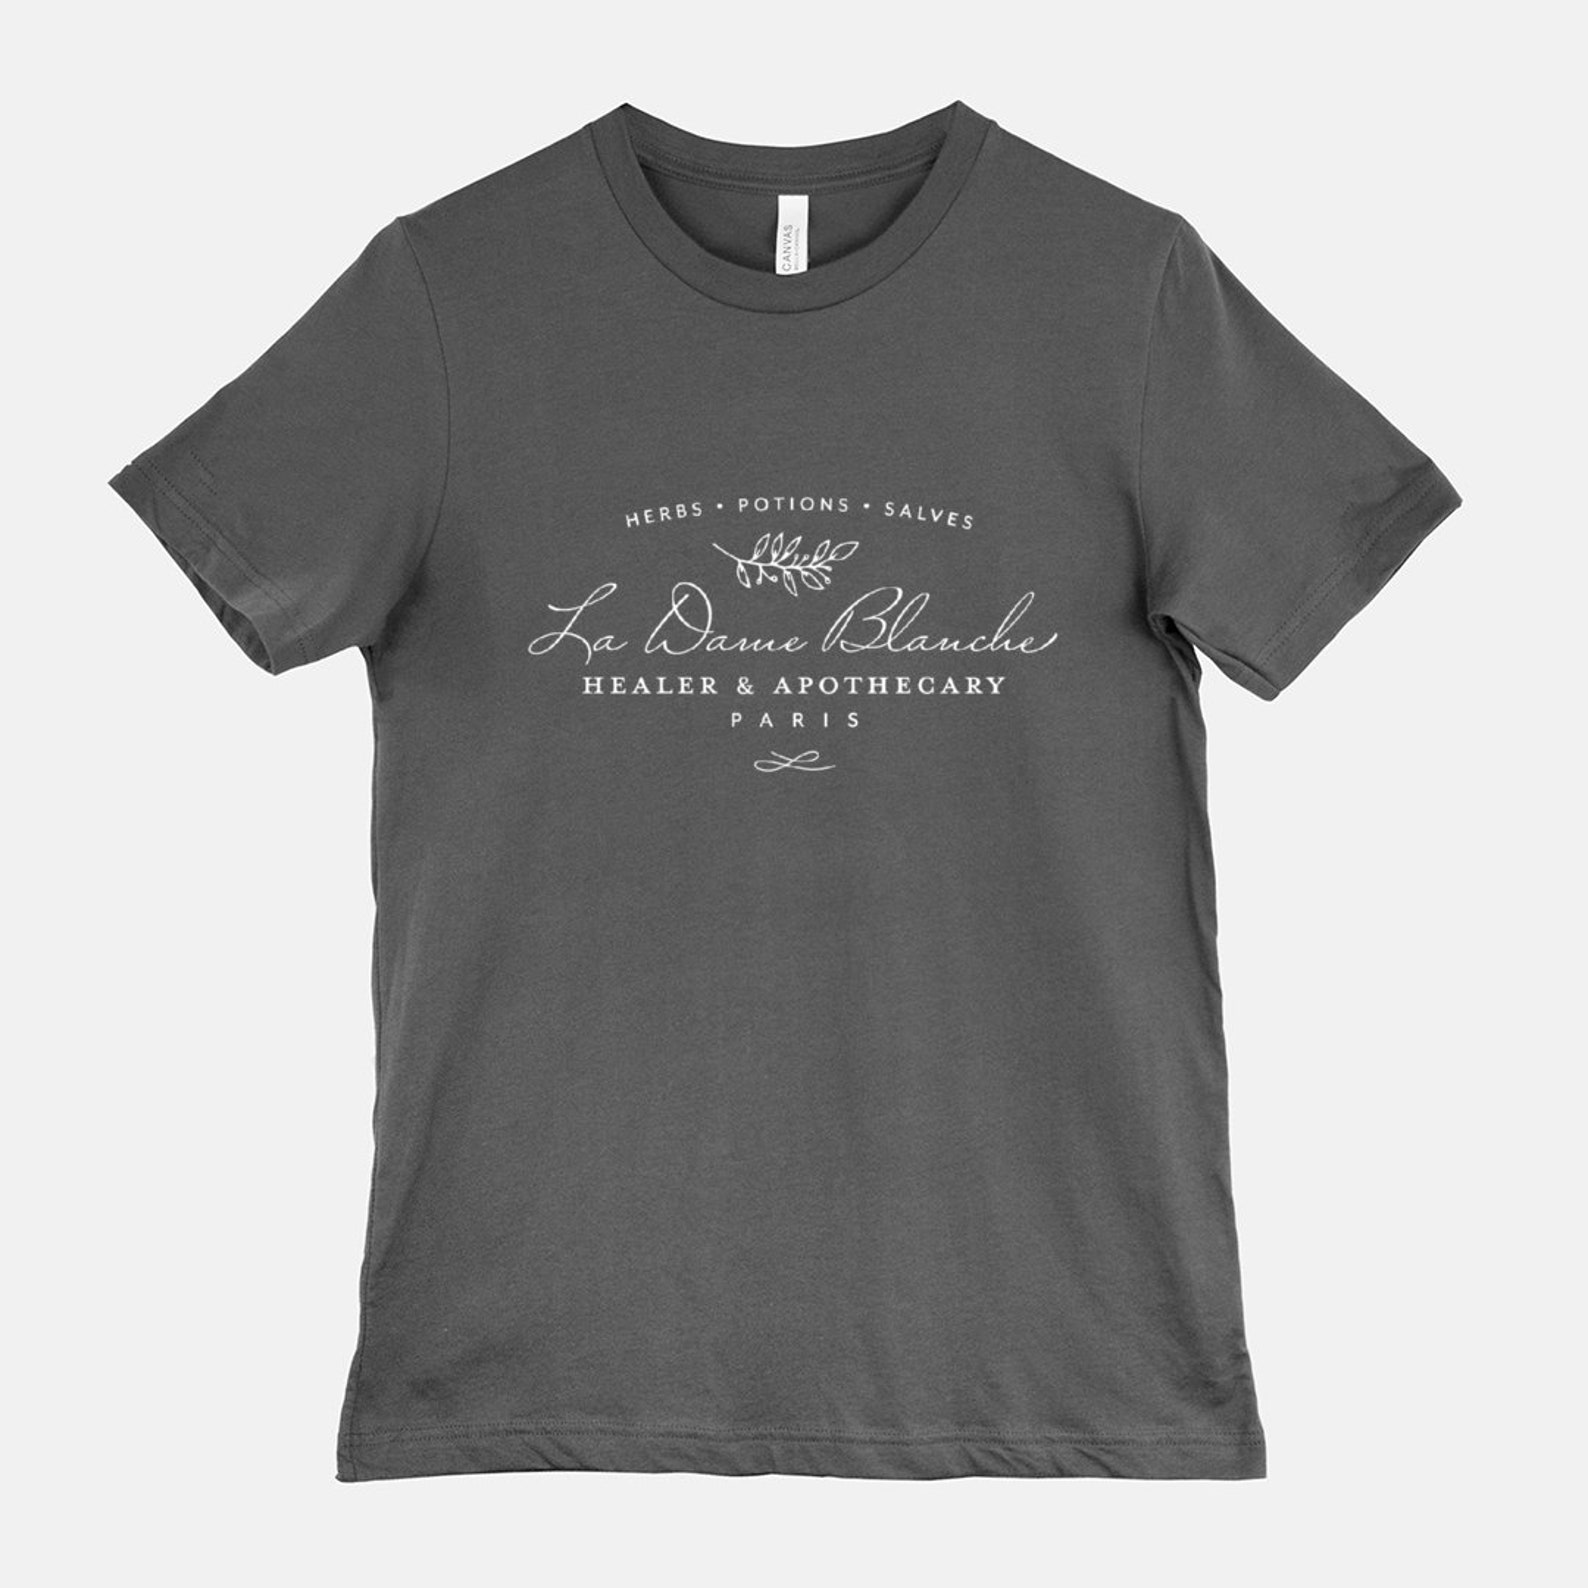 La Dame Blanche Apothecary Logo T-shirt Outlander Inspired | Etsy